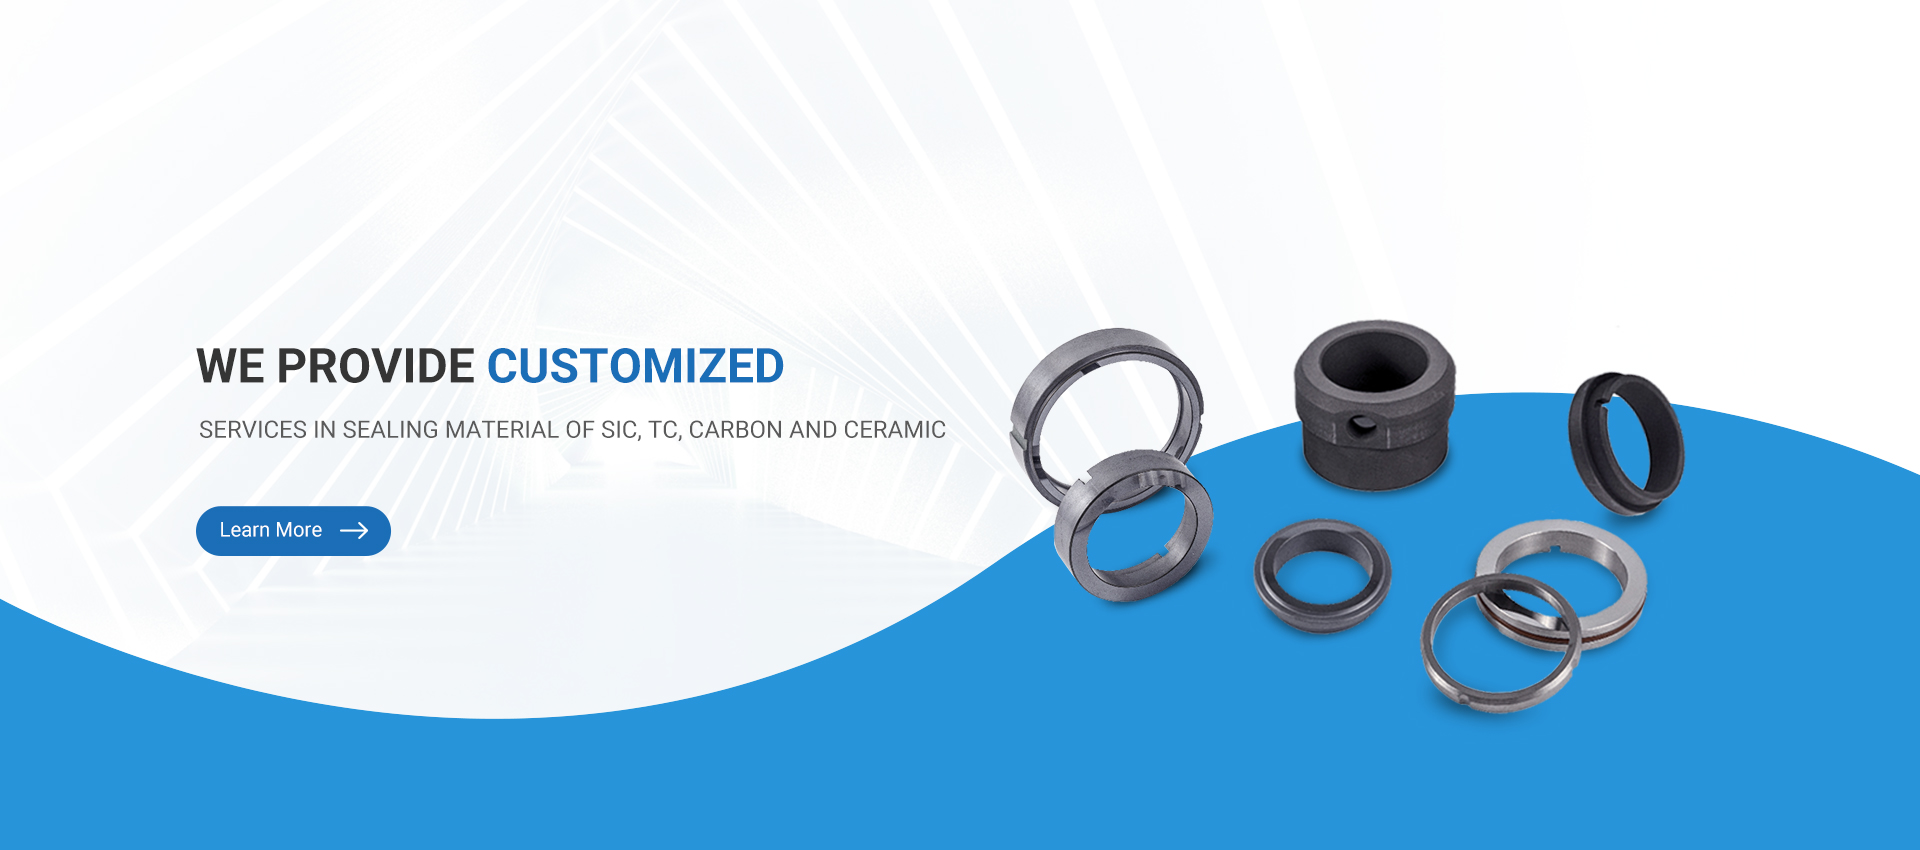 Type 155-14 Mechanical Seals 155 Shaft Size 14mm O-ring Bt-fn T04 Type 3  For Pump Material: Car/cer/nbr 5pcs/lot - Oil Seals & Other Seals -  AliExpress